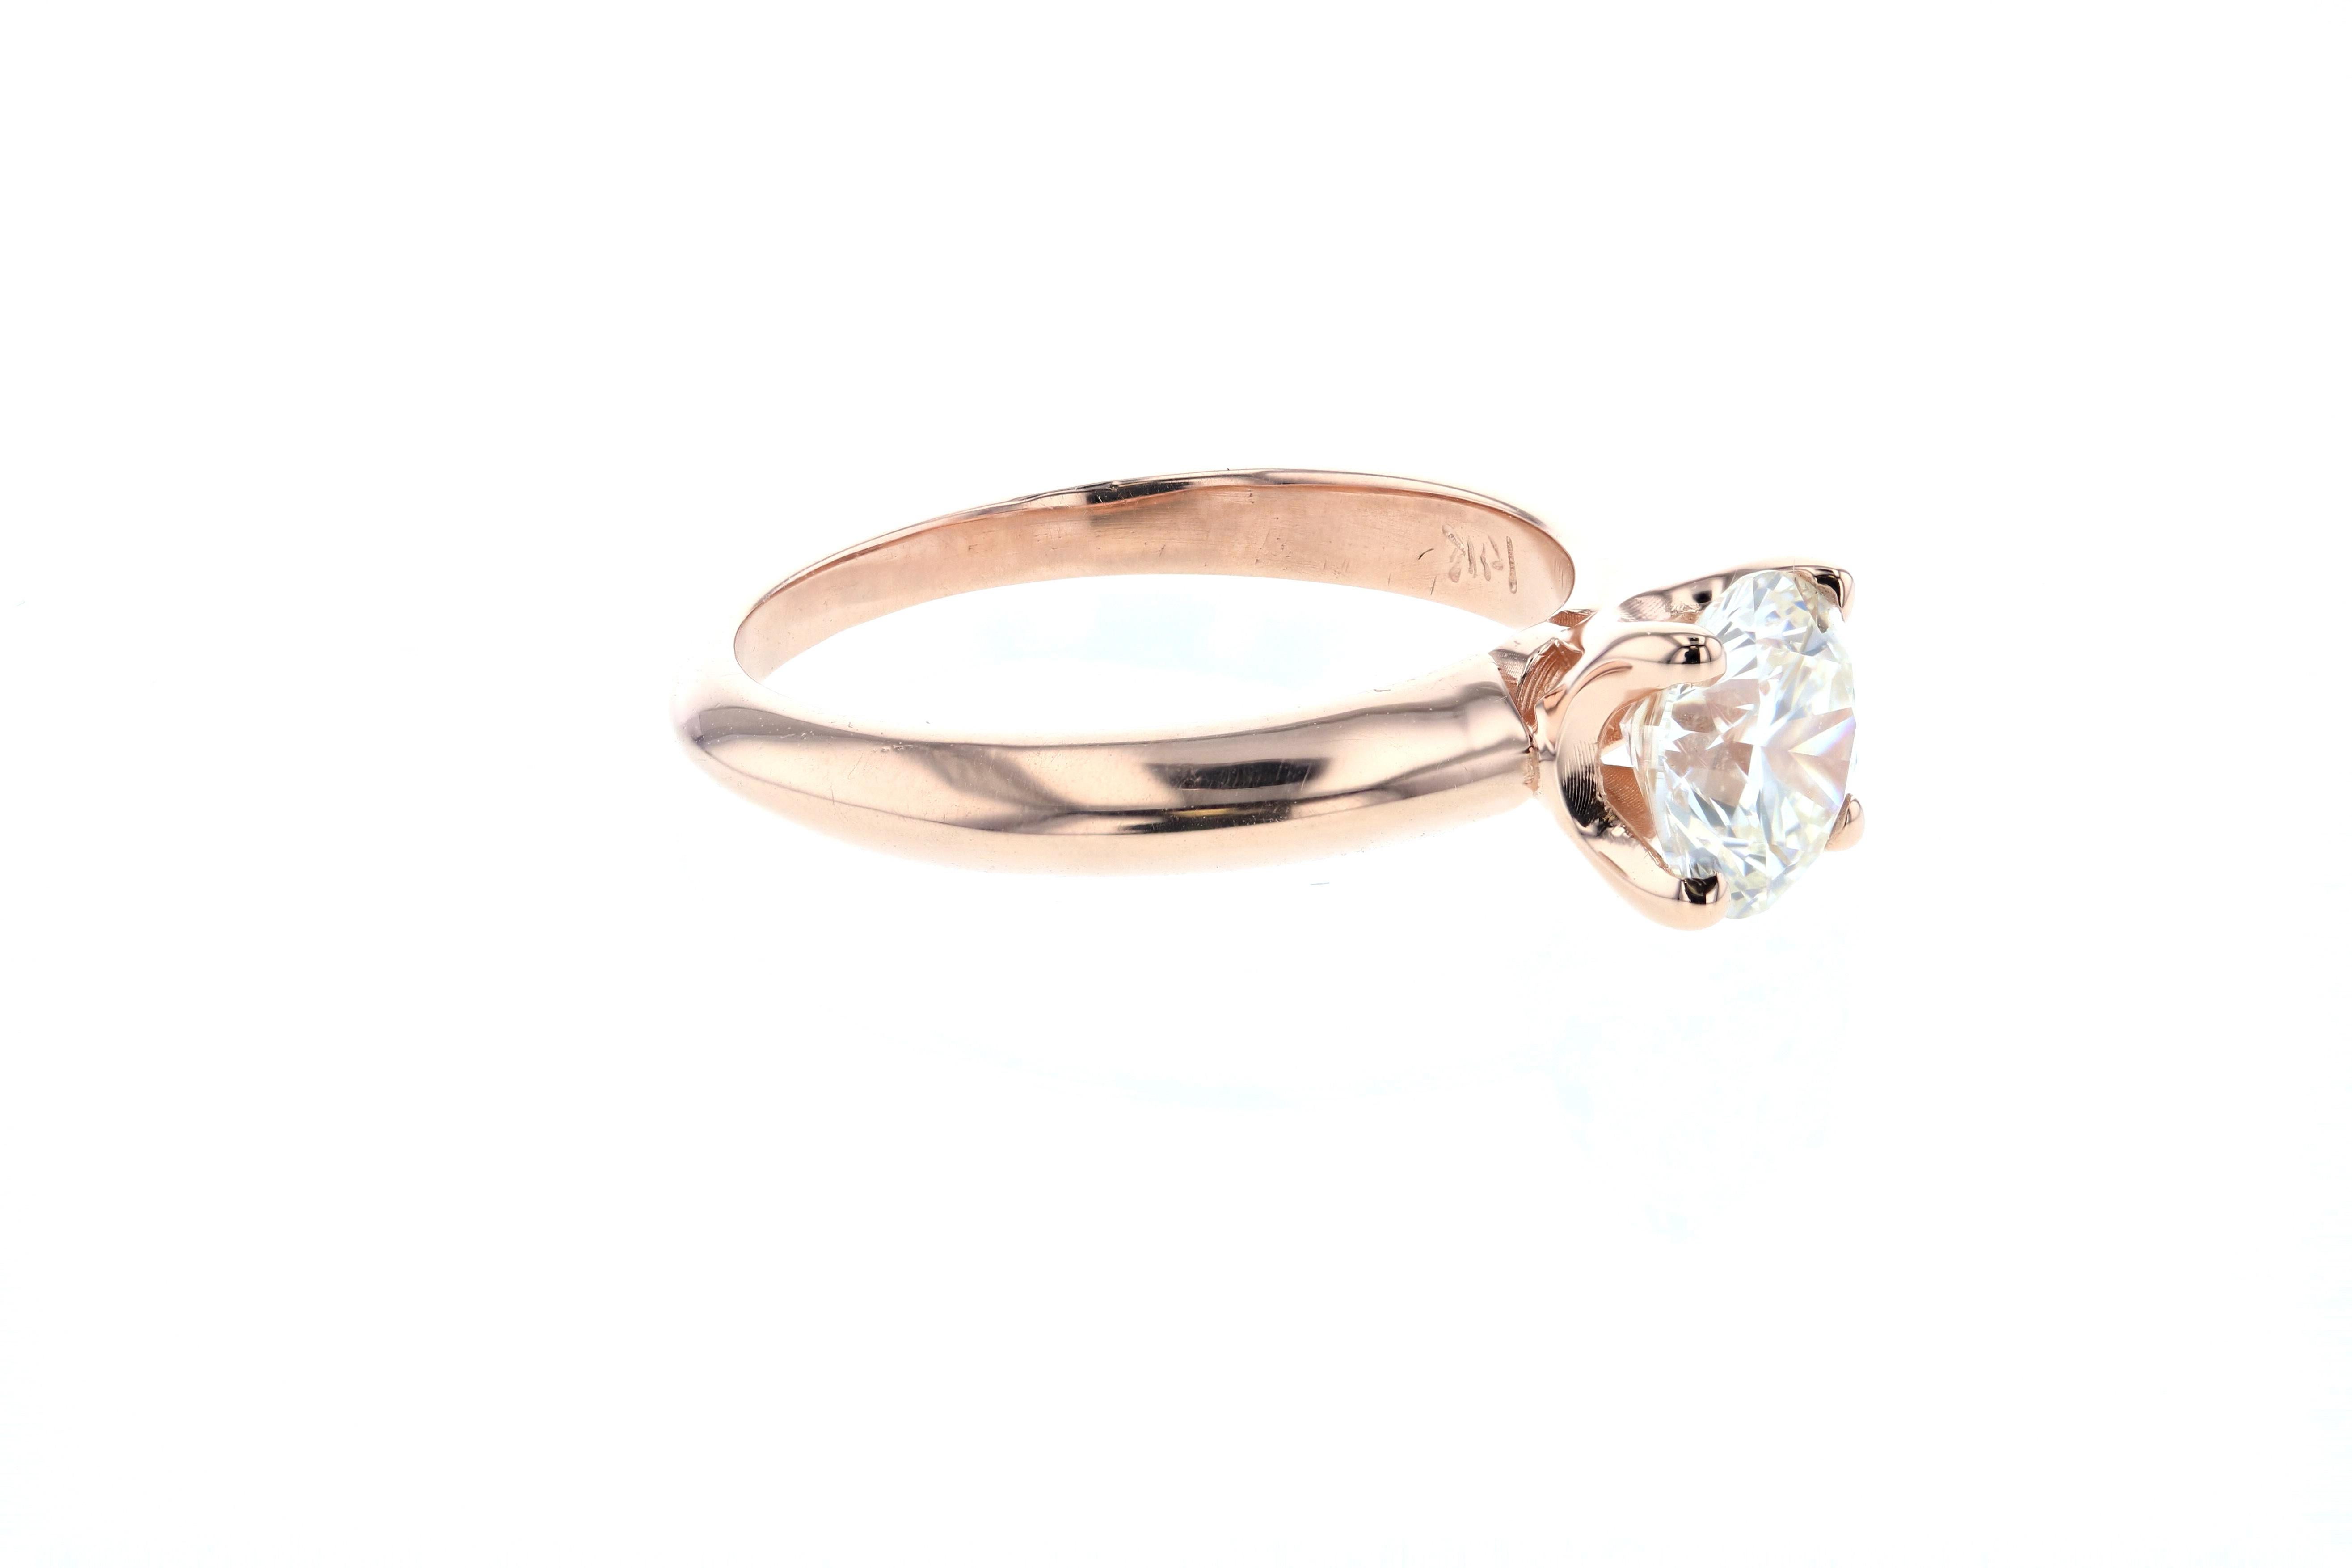 This beautiful rose gold solitaire engagement ring is crafted in 14k rose gold, and contains a Round Brilliant Cut Diamond (1.01 carats, I color, VS1 clarity). With a tapered knife edge setting and a four prong head on shank setting, this delicate